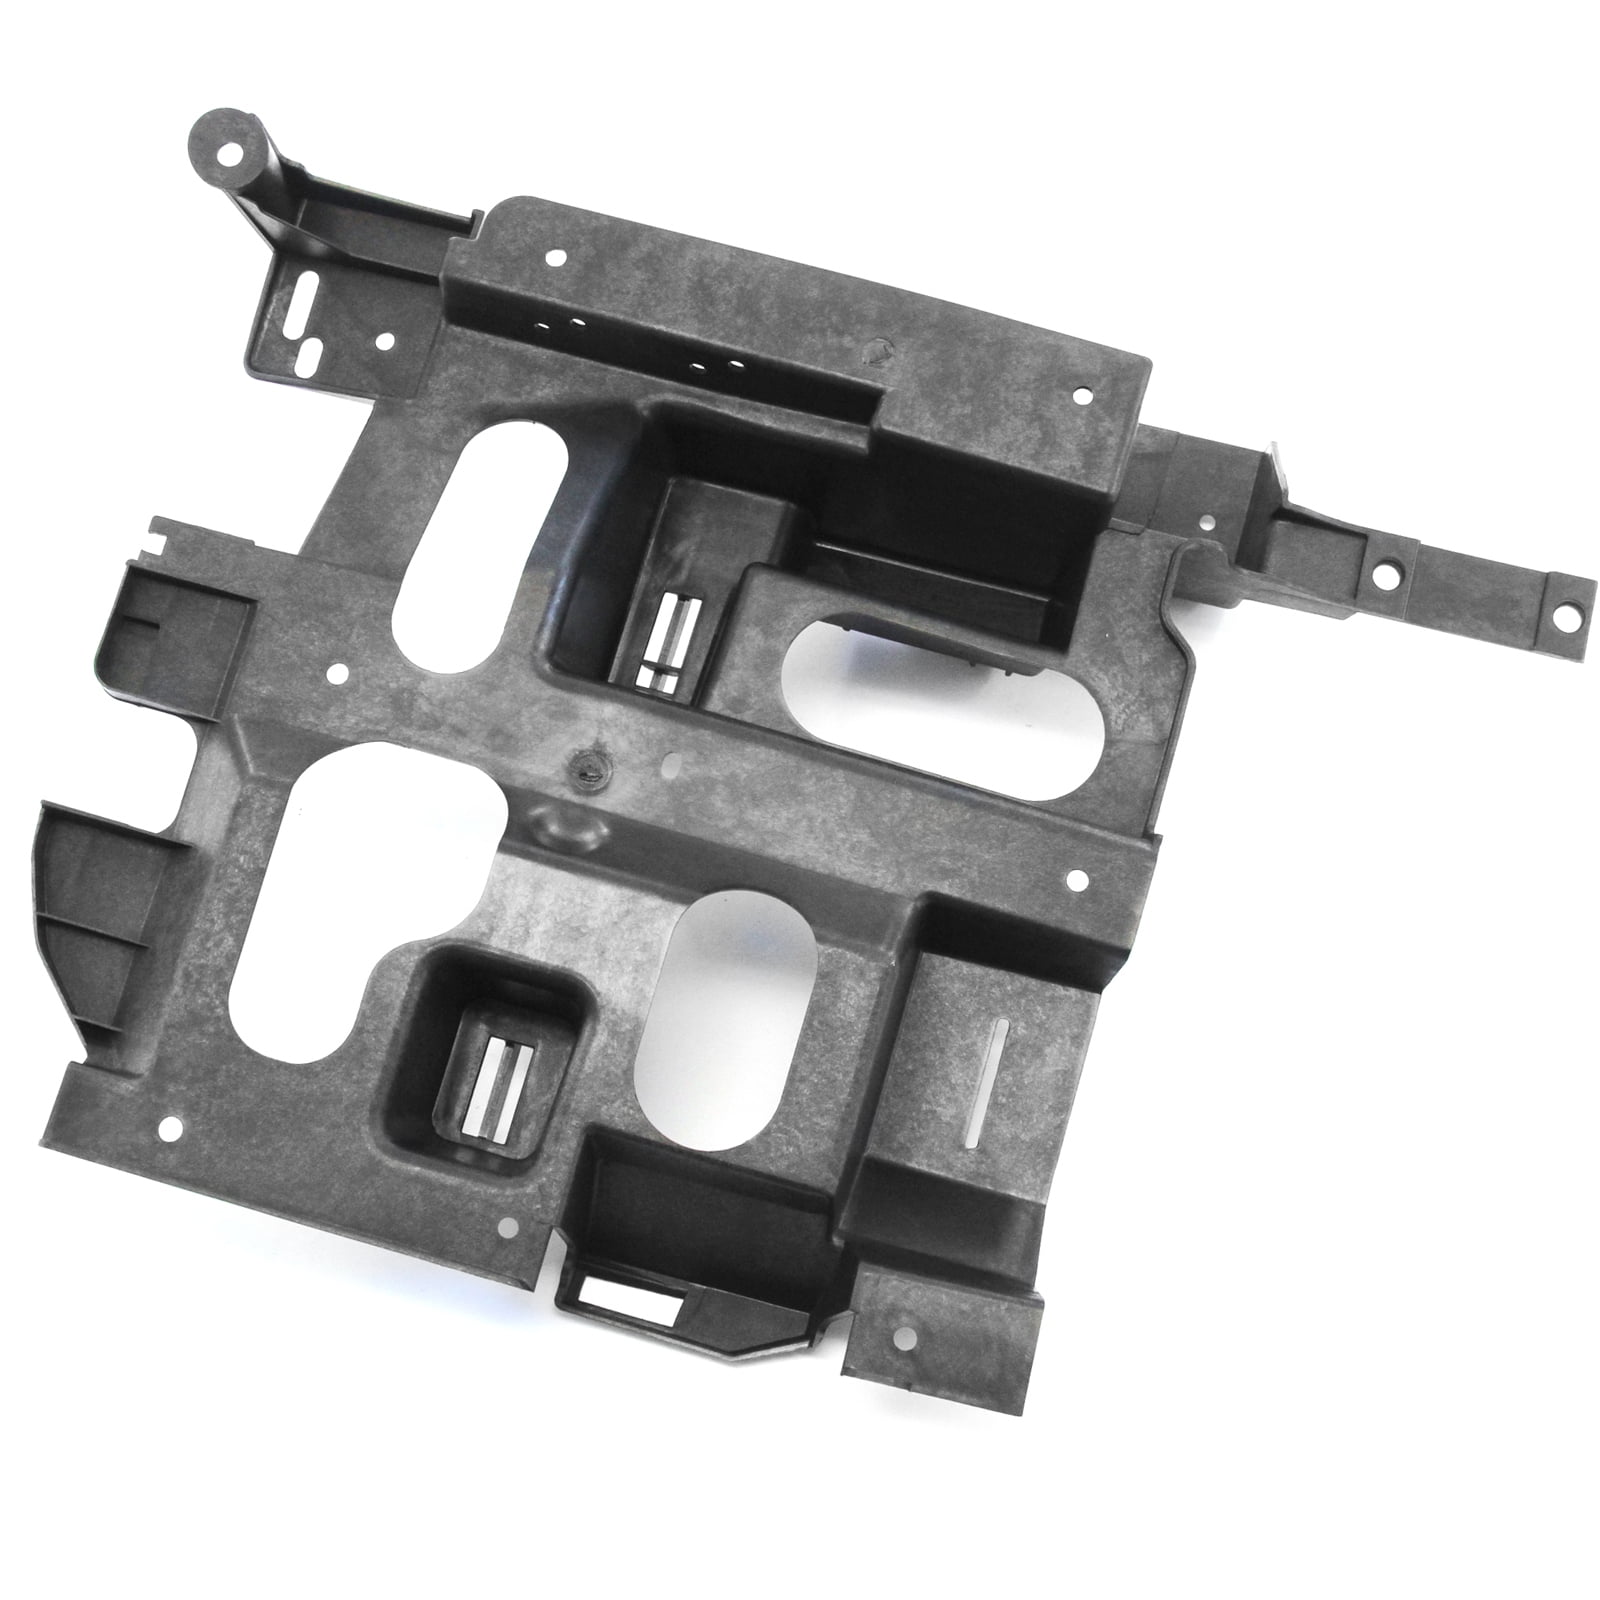 NOOTO GM1221130 Driver Side Headlight Mount Support Holder Bracket fit for  2003-07 Chevy Silverado